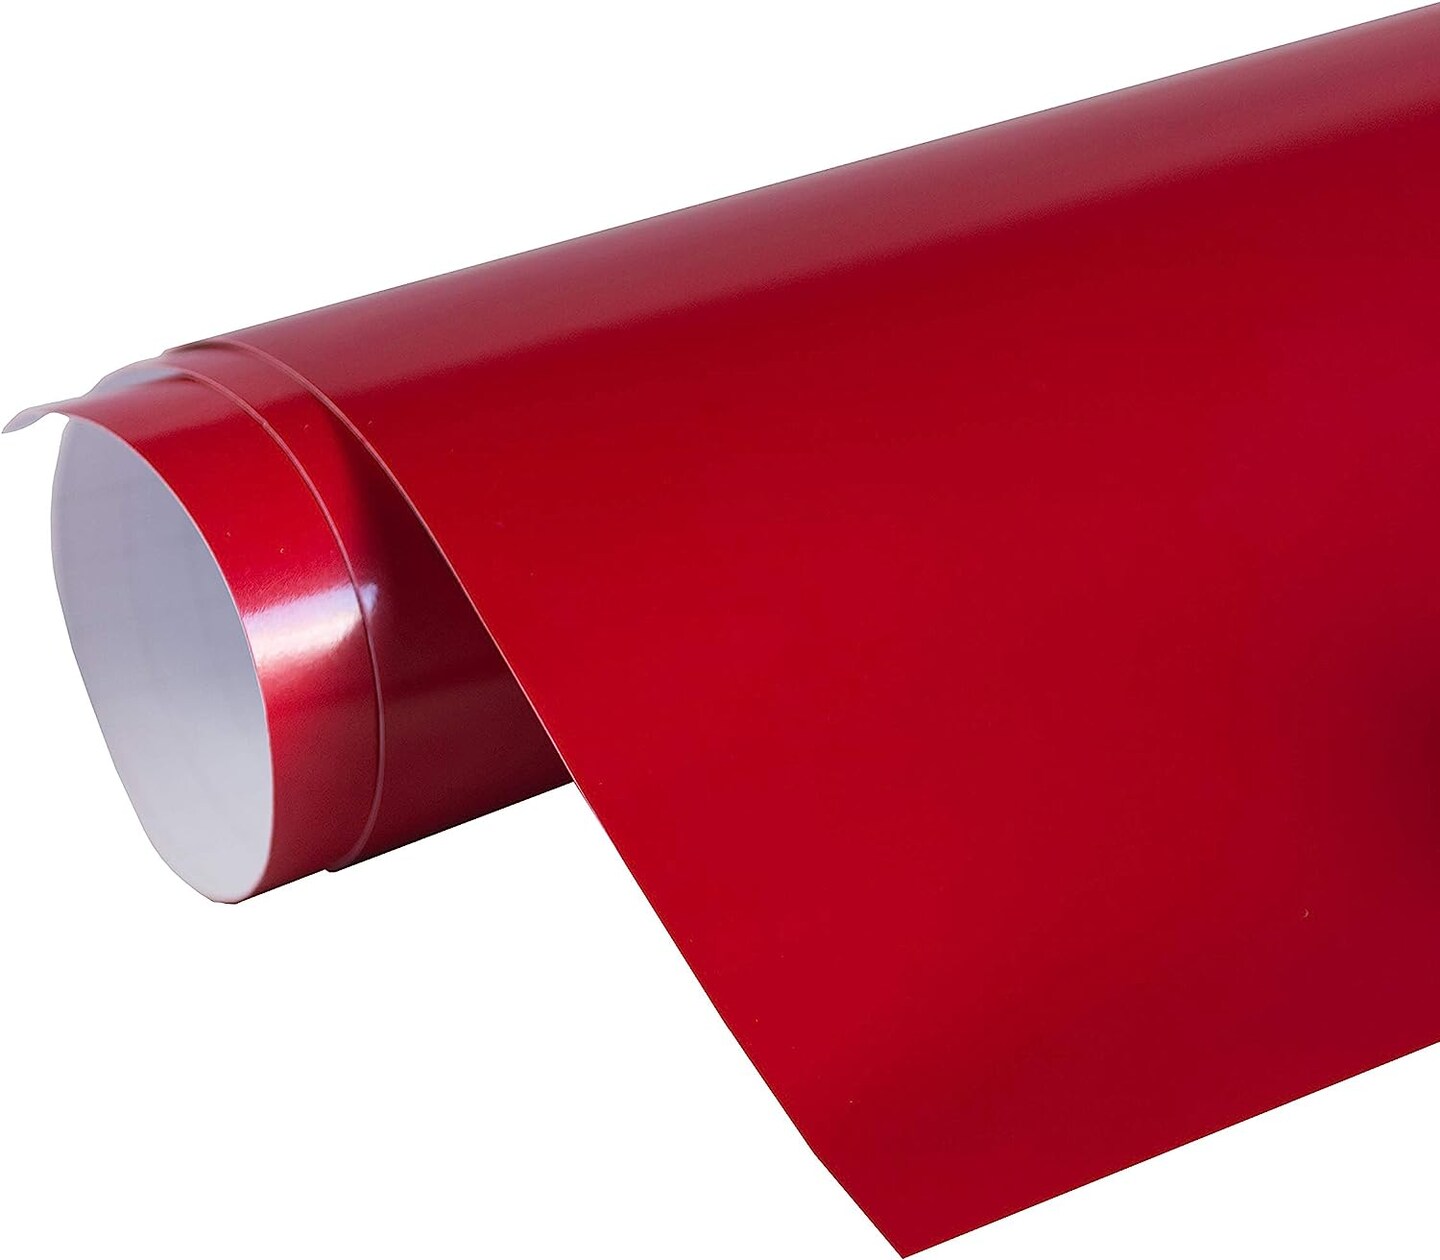 24" x 10 ft Roll of Glossy Orange Repositionable Adhesive-Backed Vinyl for Craft Cutters, Punches and Vinyl Sign Cutters